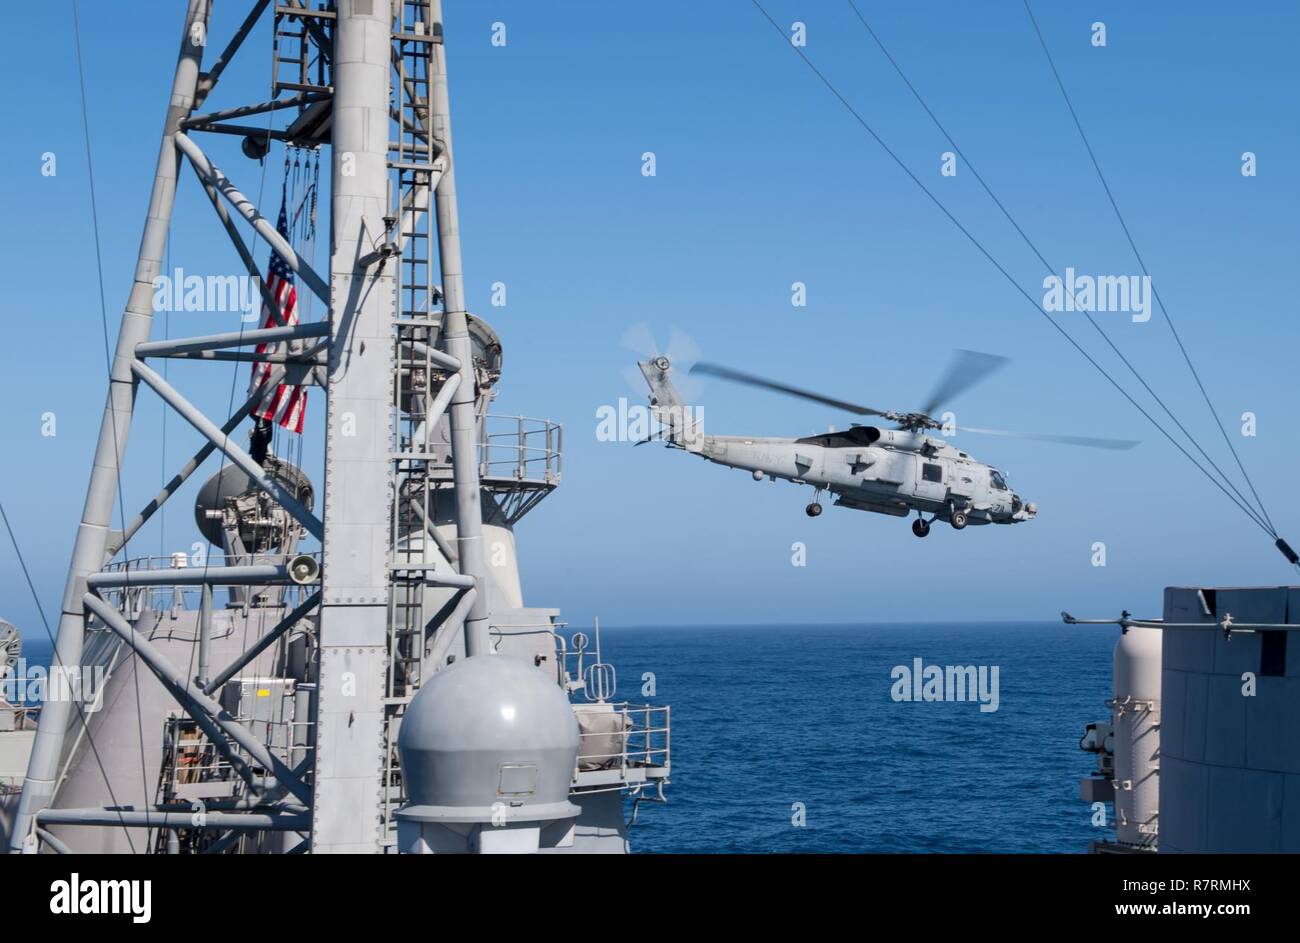 PACIFIC OCEAN (April 1, 2017) An MH-60R Sea Hawk helicopter assigned to the 'Wolfpack' of Helicopter Maritime Strike Squadron (HSM) 75 departs the Ticonderoga-class guided-missile cruiser USS Princeton (CG 59) during a composite training unit exercise (COMPTUEX) with the Nimitz Carrier Strike Group in preparation for an upcoming deployment. COMPTUEX tests the mission readiness of the strike group's assets through simulated real-world scenarios and their ability to perform as an integrated unit. Stock Photo